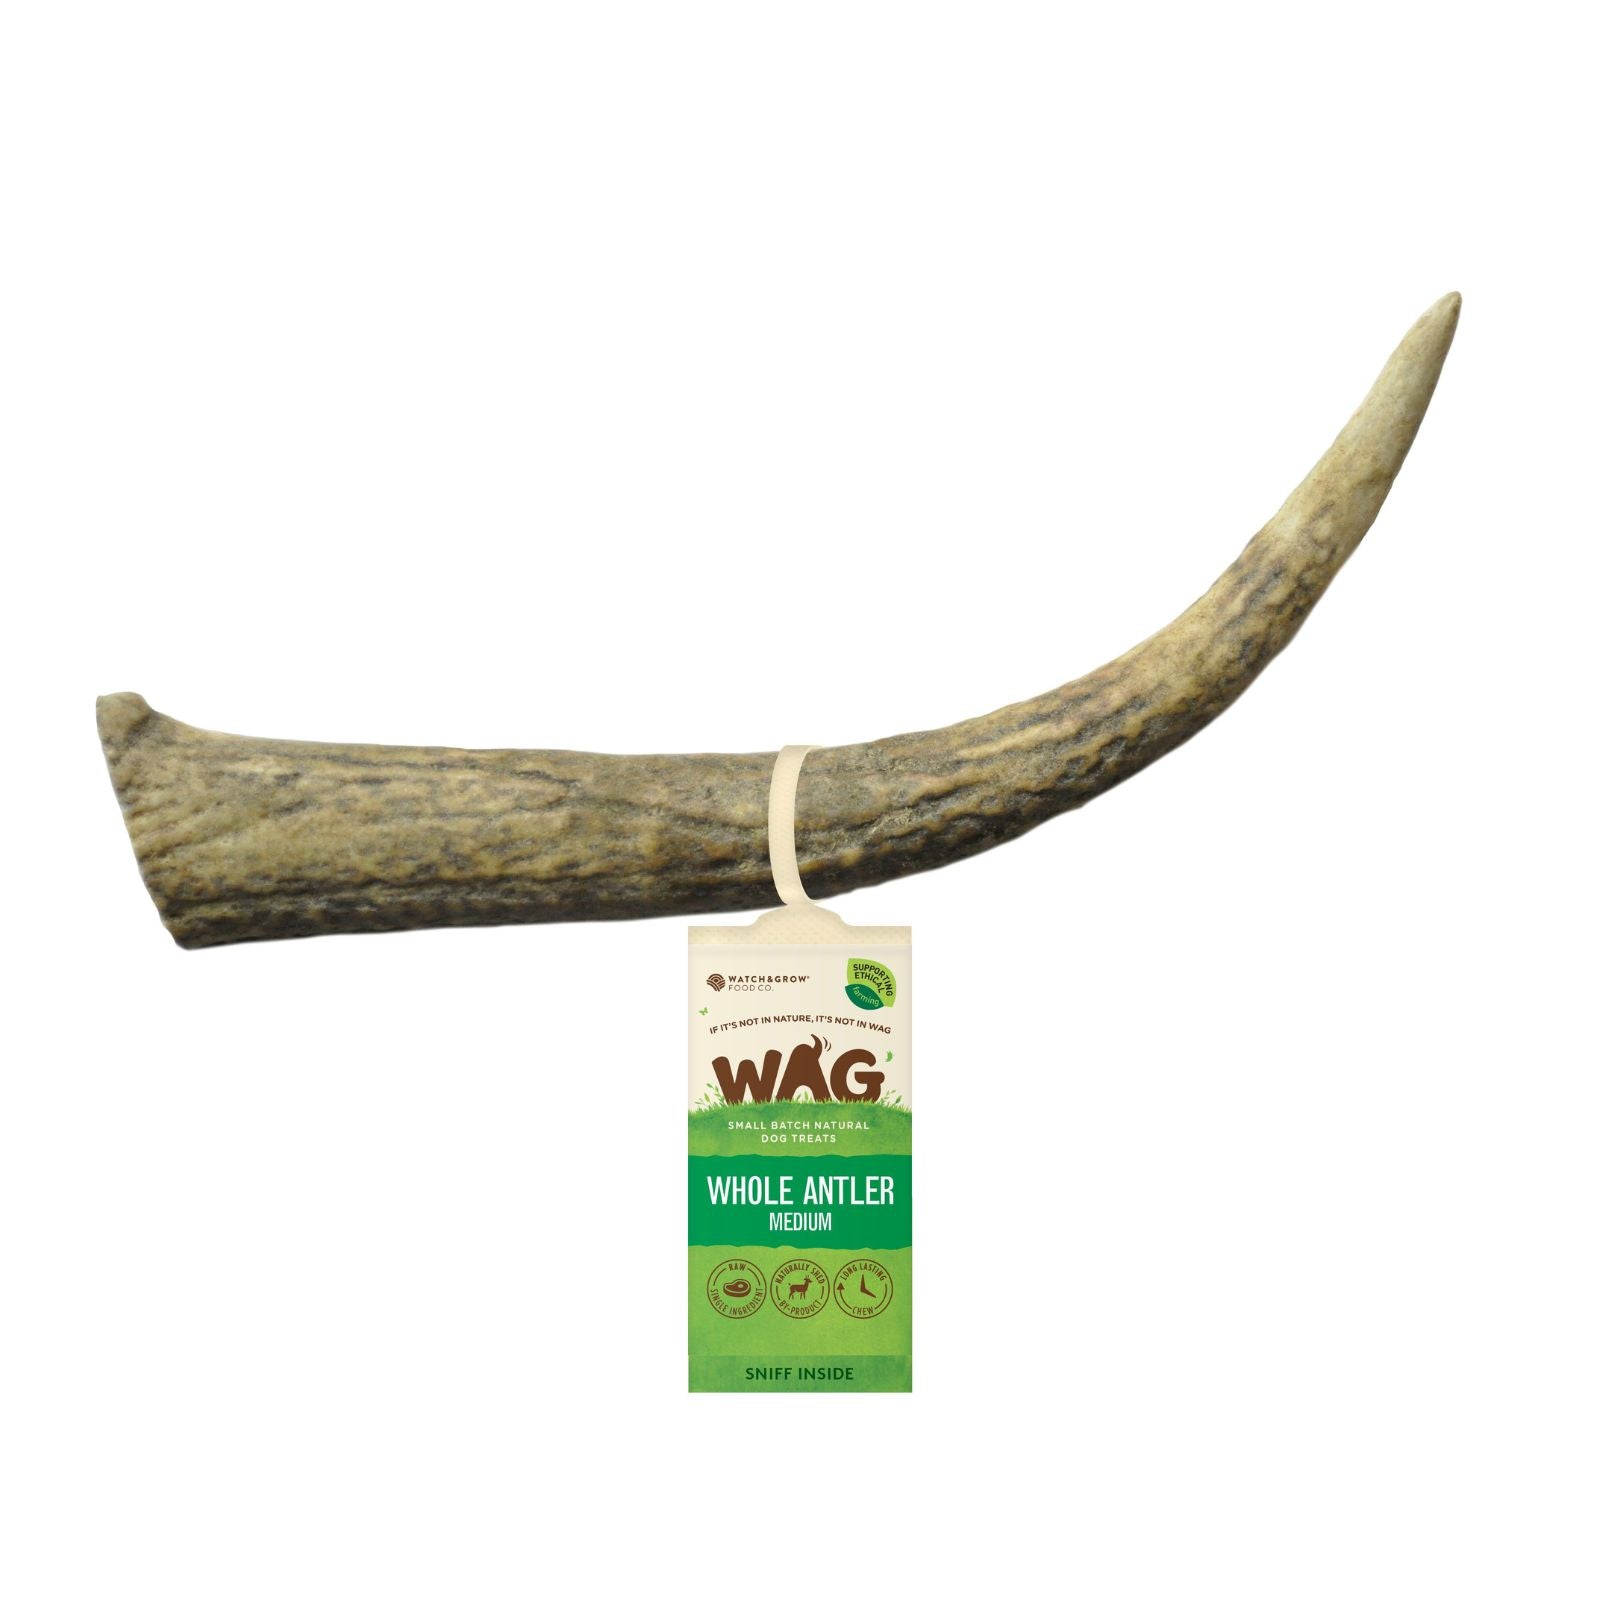 New Zealand Sourced Medium Deer Antler Dog Treat for Strong Chewers